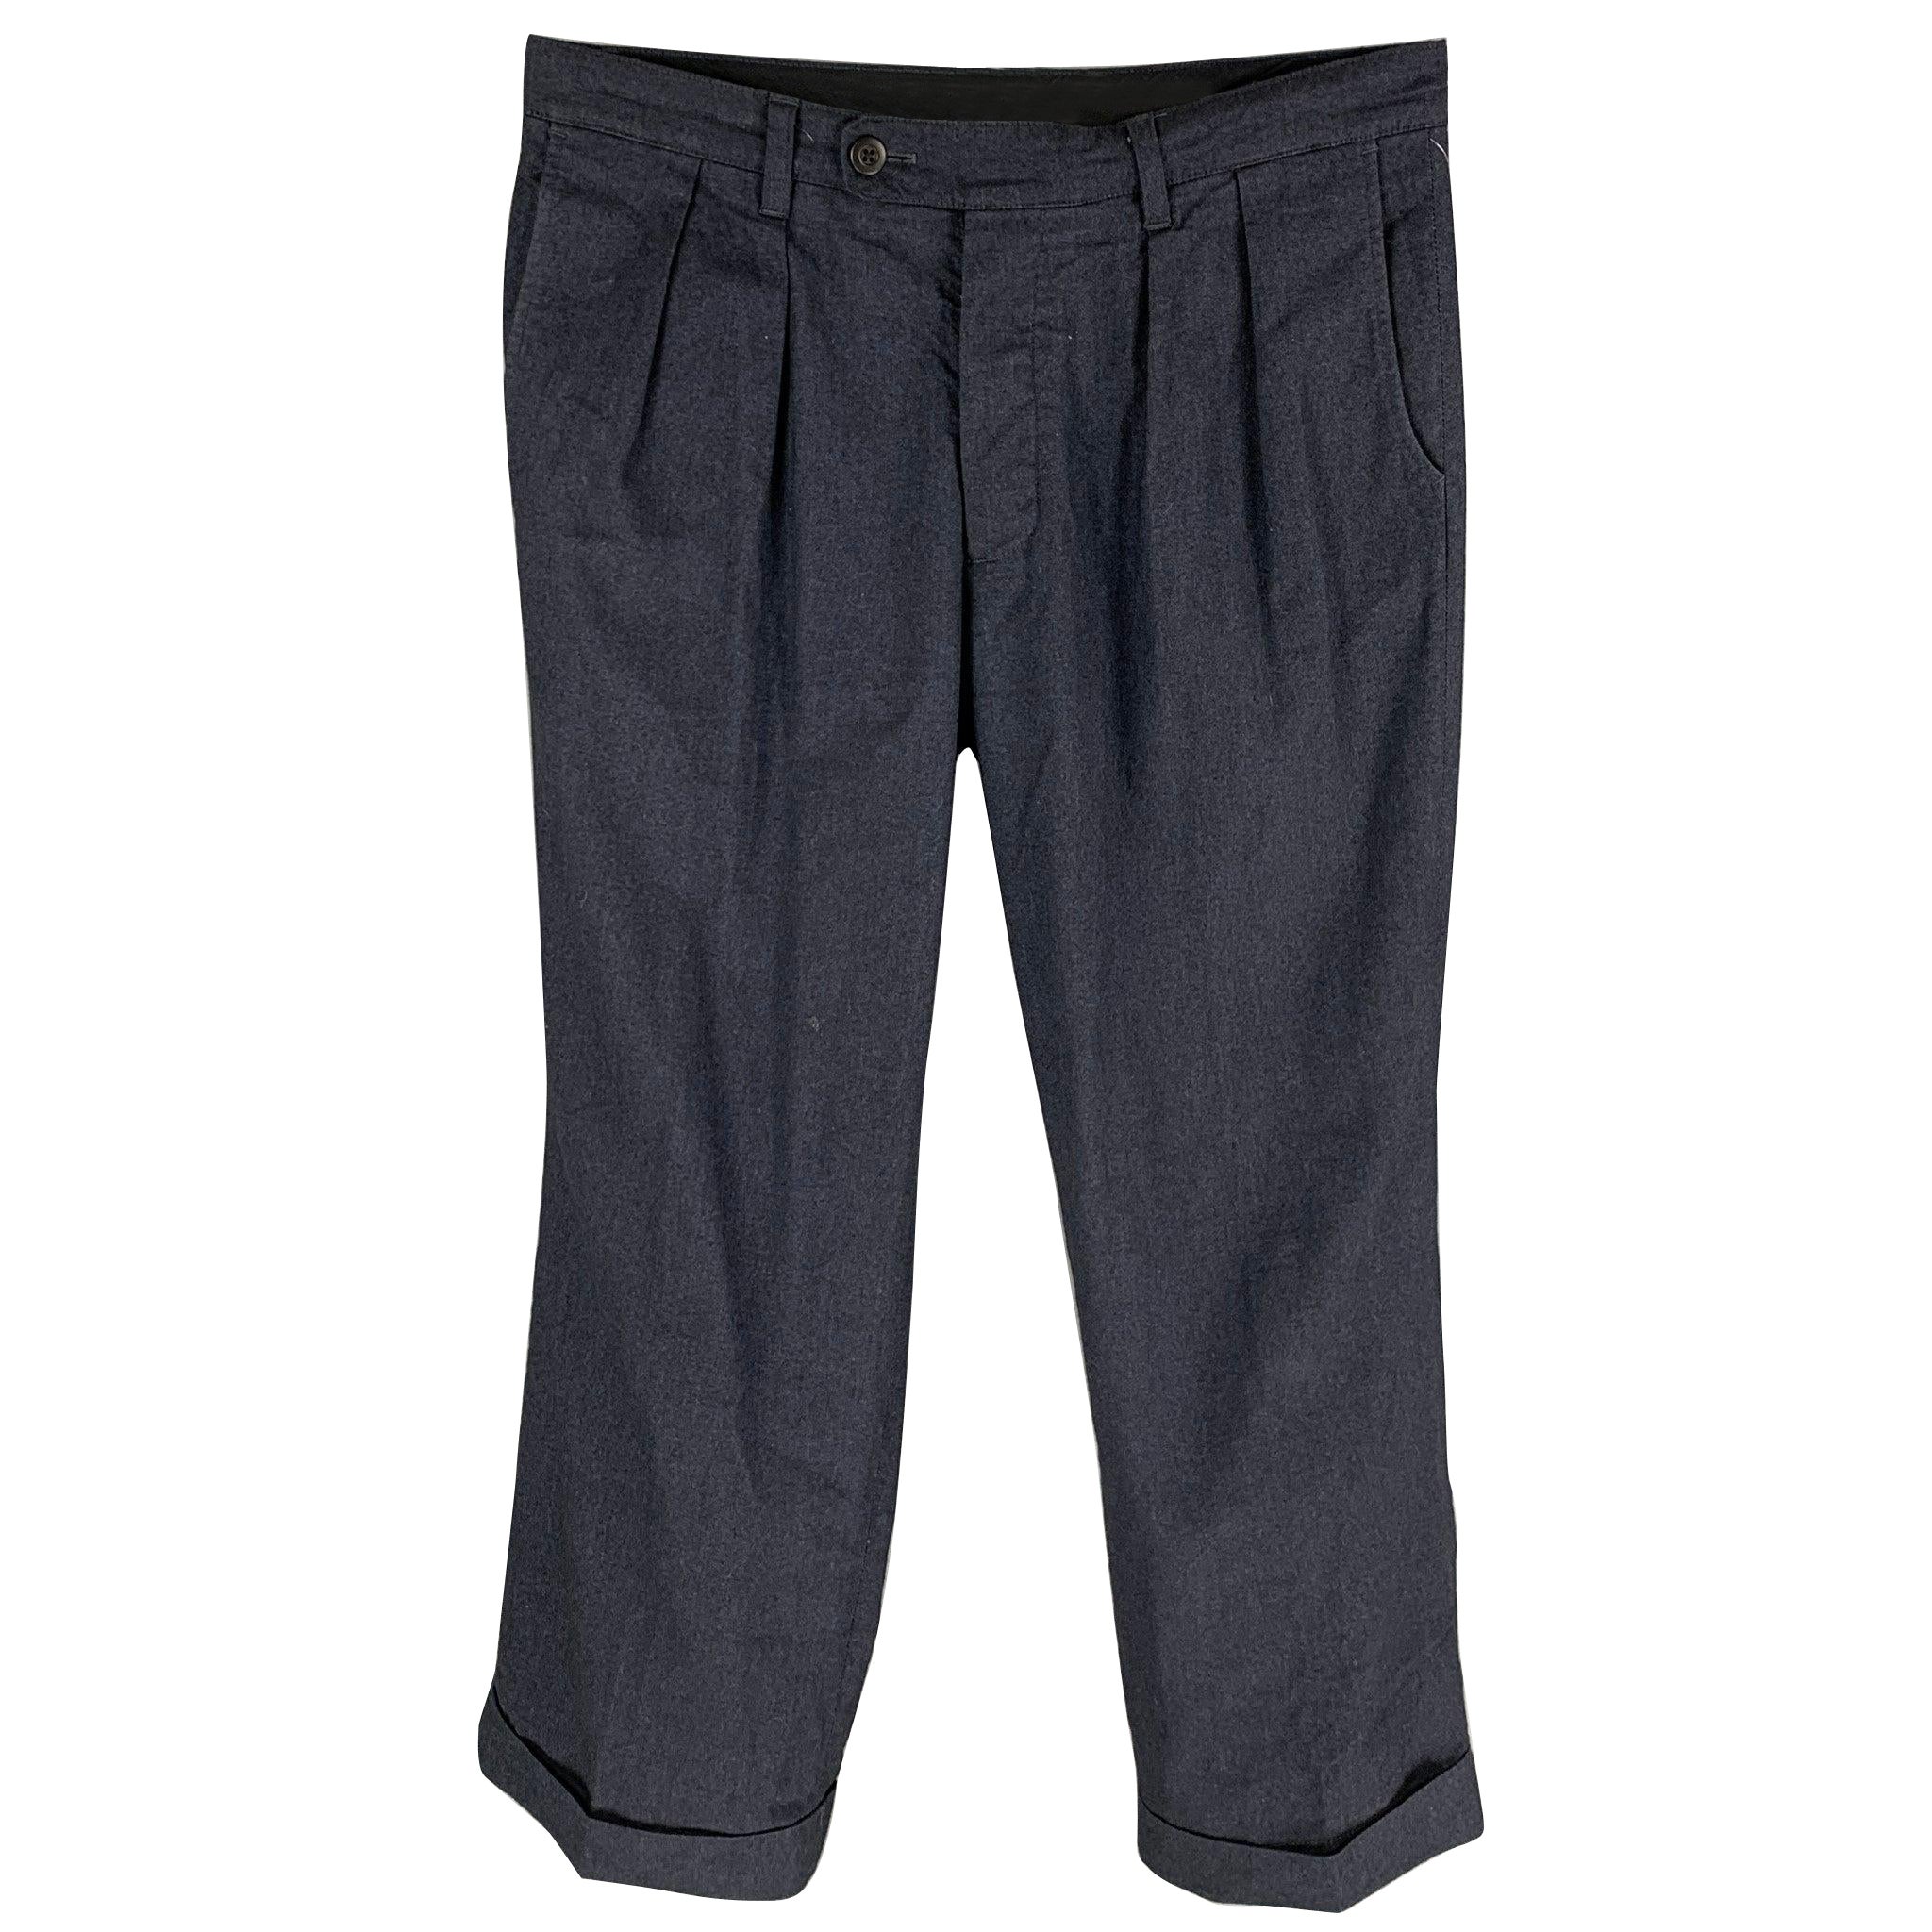 TS (S) Size M Indigo Cotton Blend Pleated Casual Pants For Sale